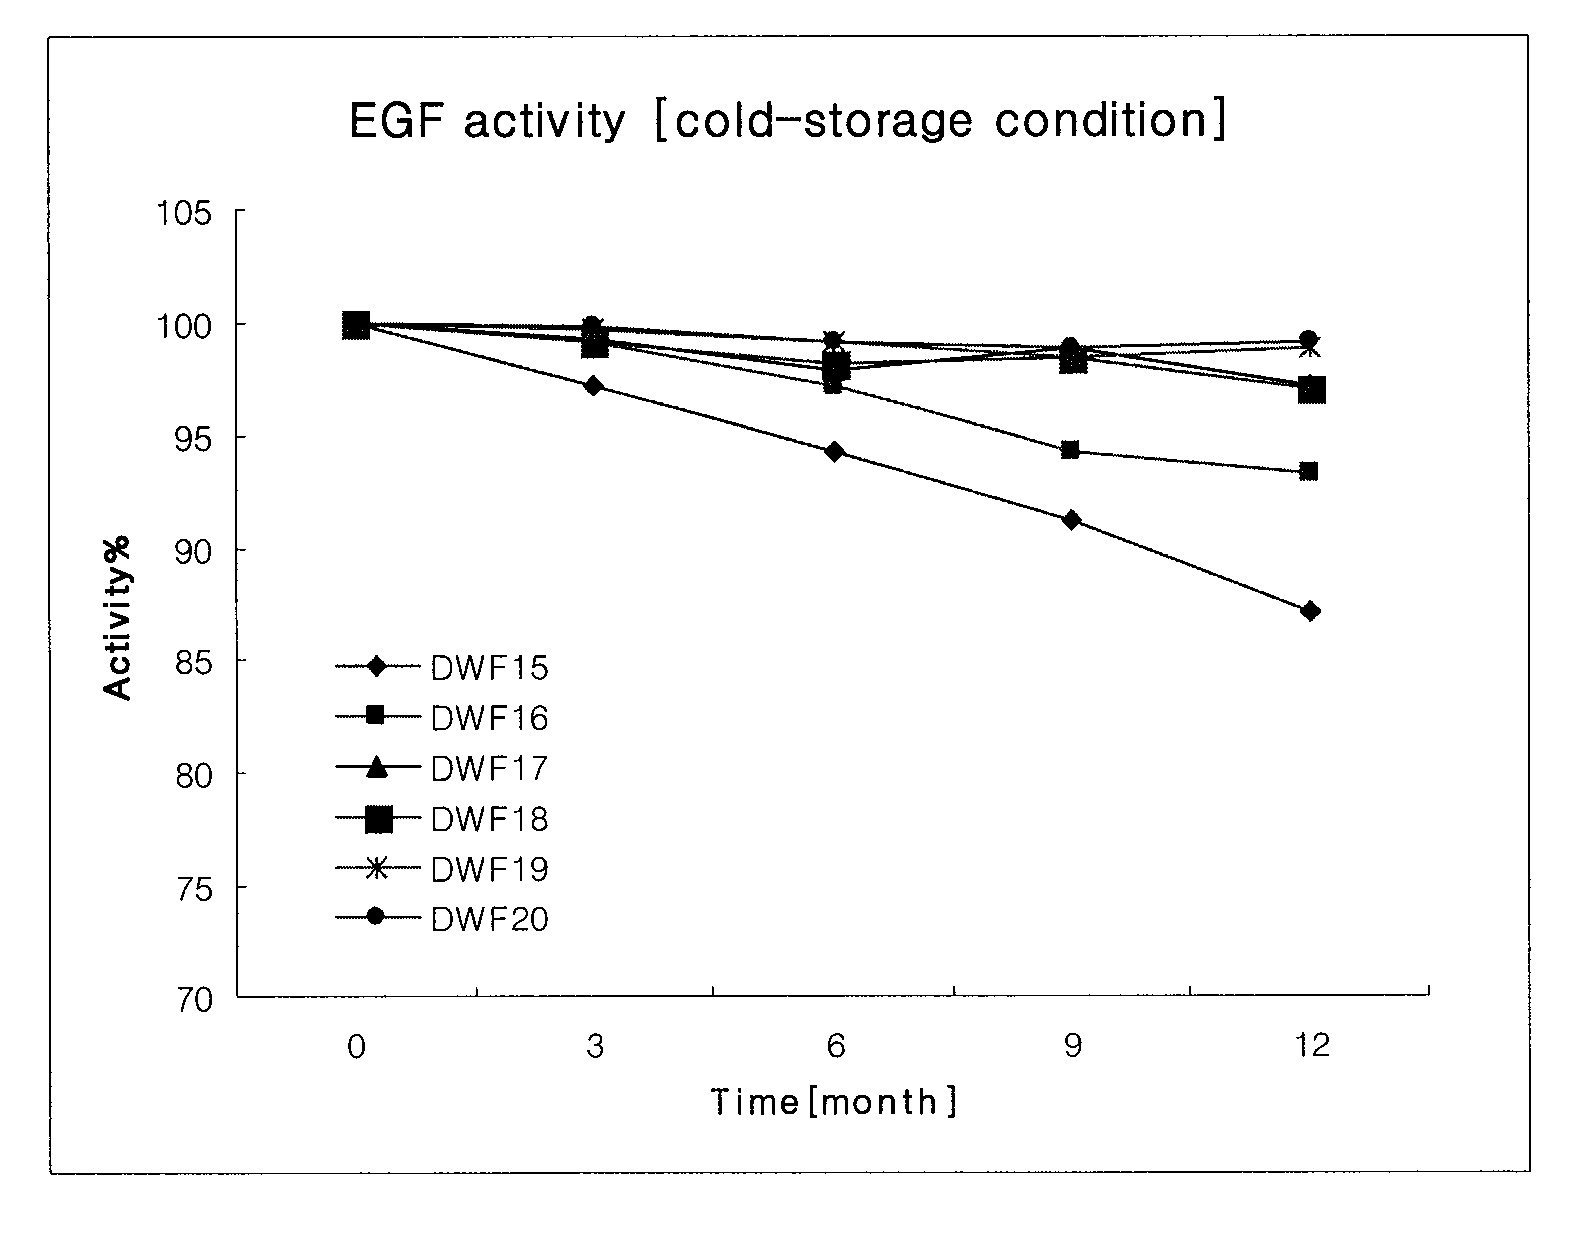 Sustained release film formulation for healing wound comprising epidermal growth factor